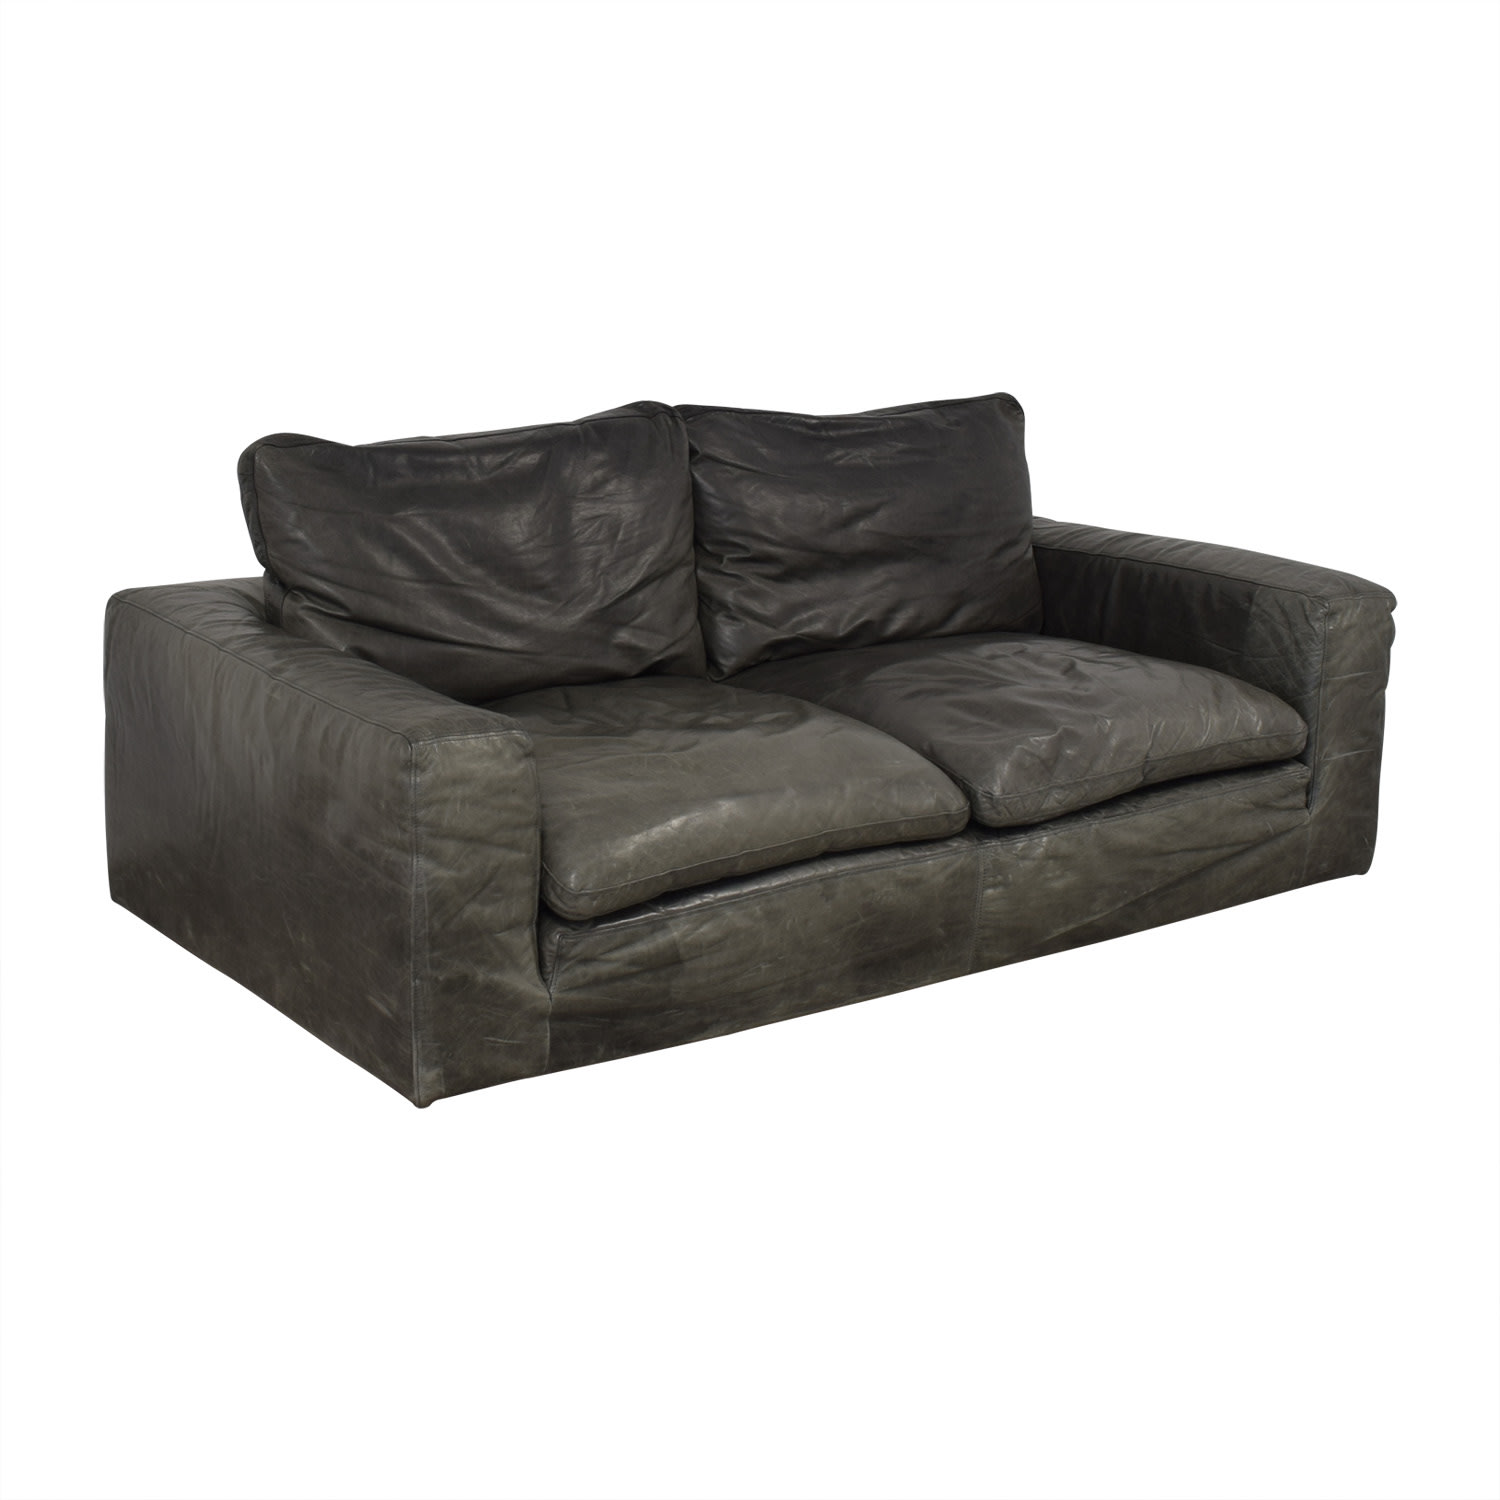 https://res.cloudinary.com/dkqtxtobb/image/upload/f_auto,q_auto:best,w_1500/product-assets/71727/restoration-hardware/sofas/classic-sofas/restoration-hardware-cloud-leather-two-seat-cushion-sofa-second-hand.jpeg